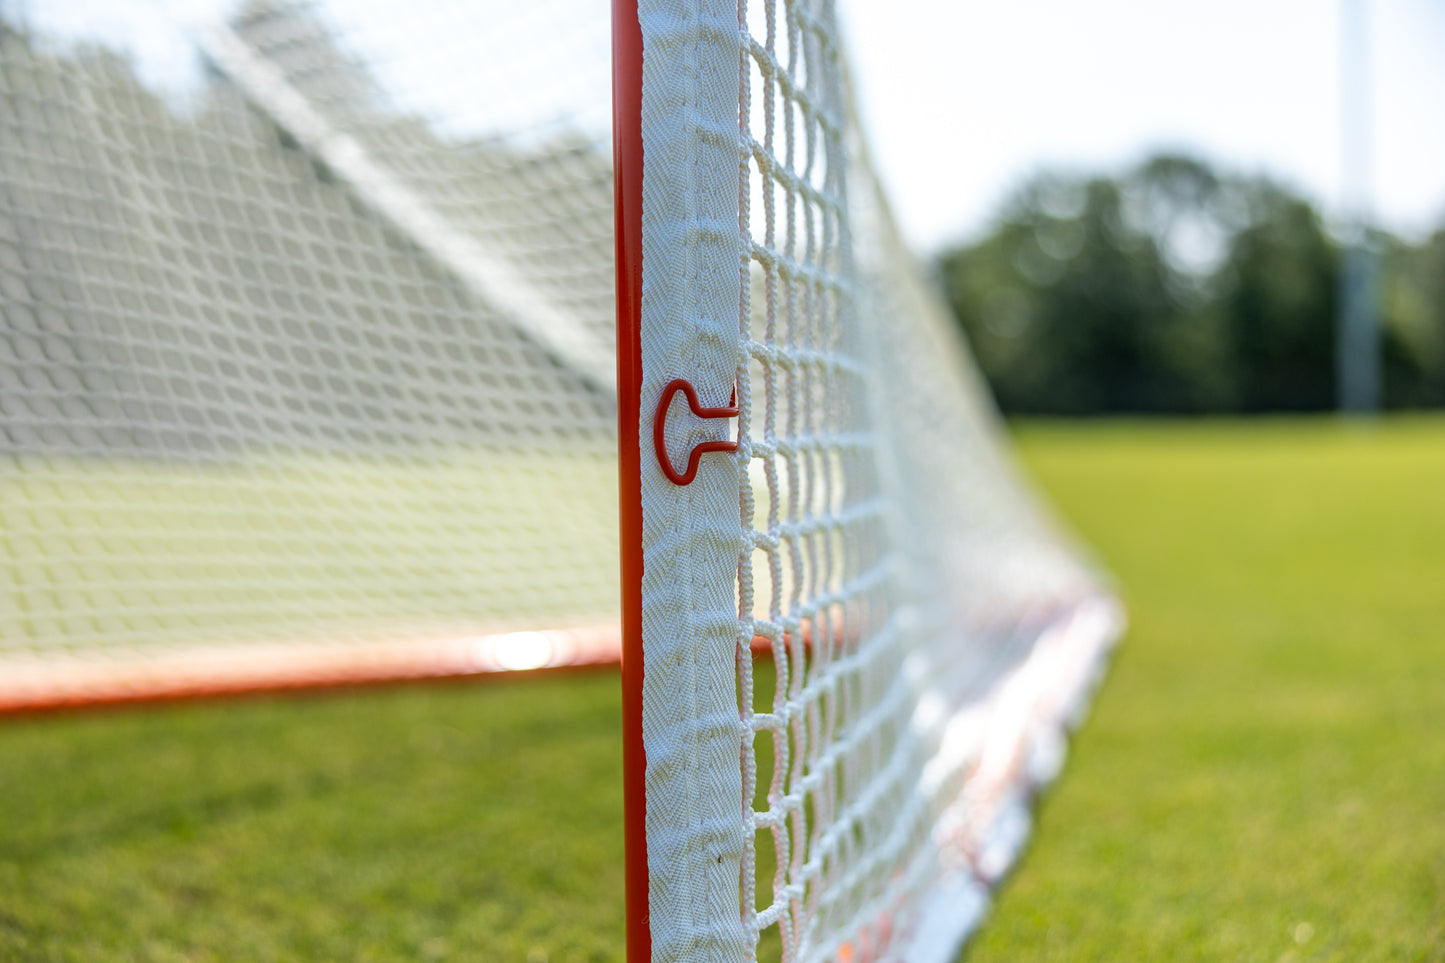 NEW! QUICK CLIP™ Tournament Goal - With Quick Attach Netting - Net attaches in 90 seconds - Available With Choice of 5mm or 6mm White Net, By Crankshooter® Free Shipping